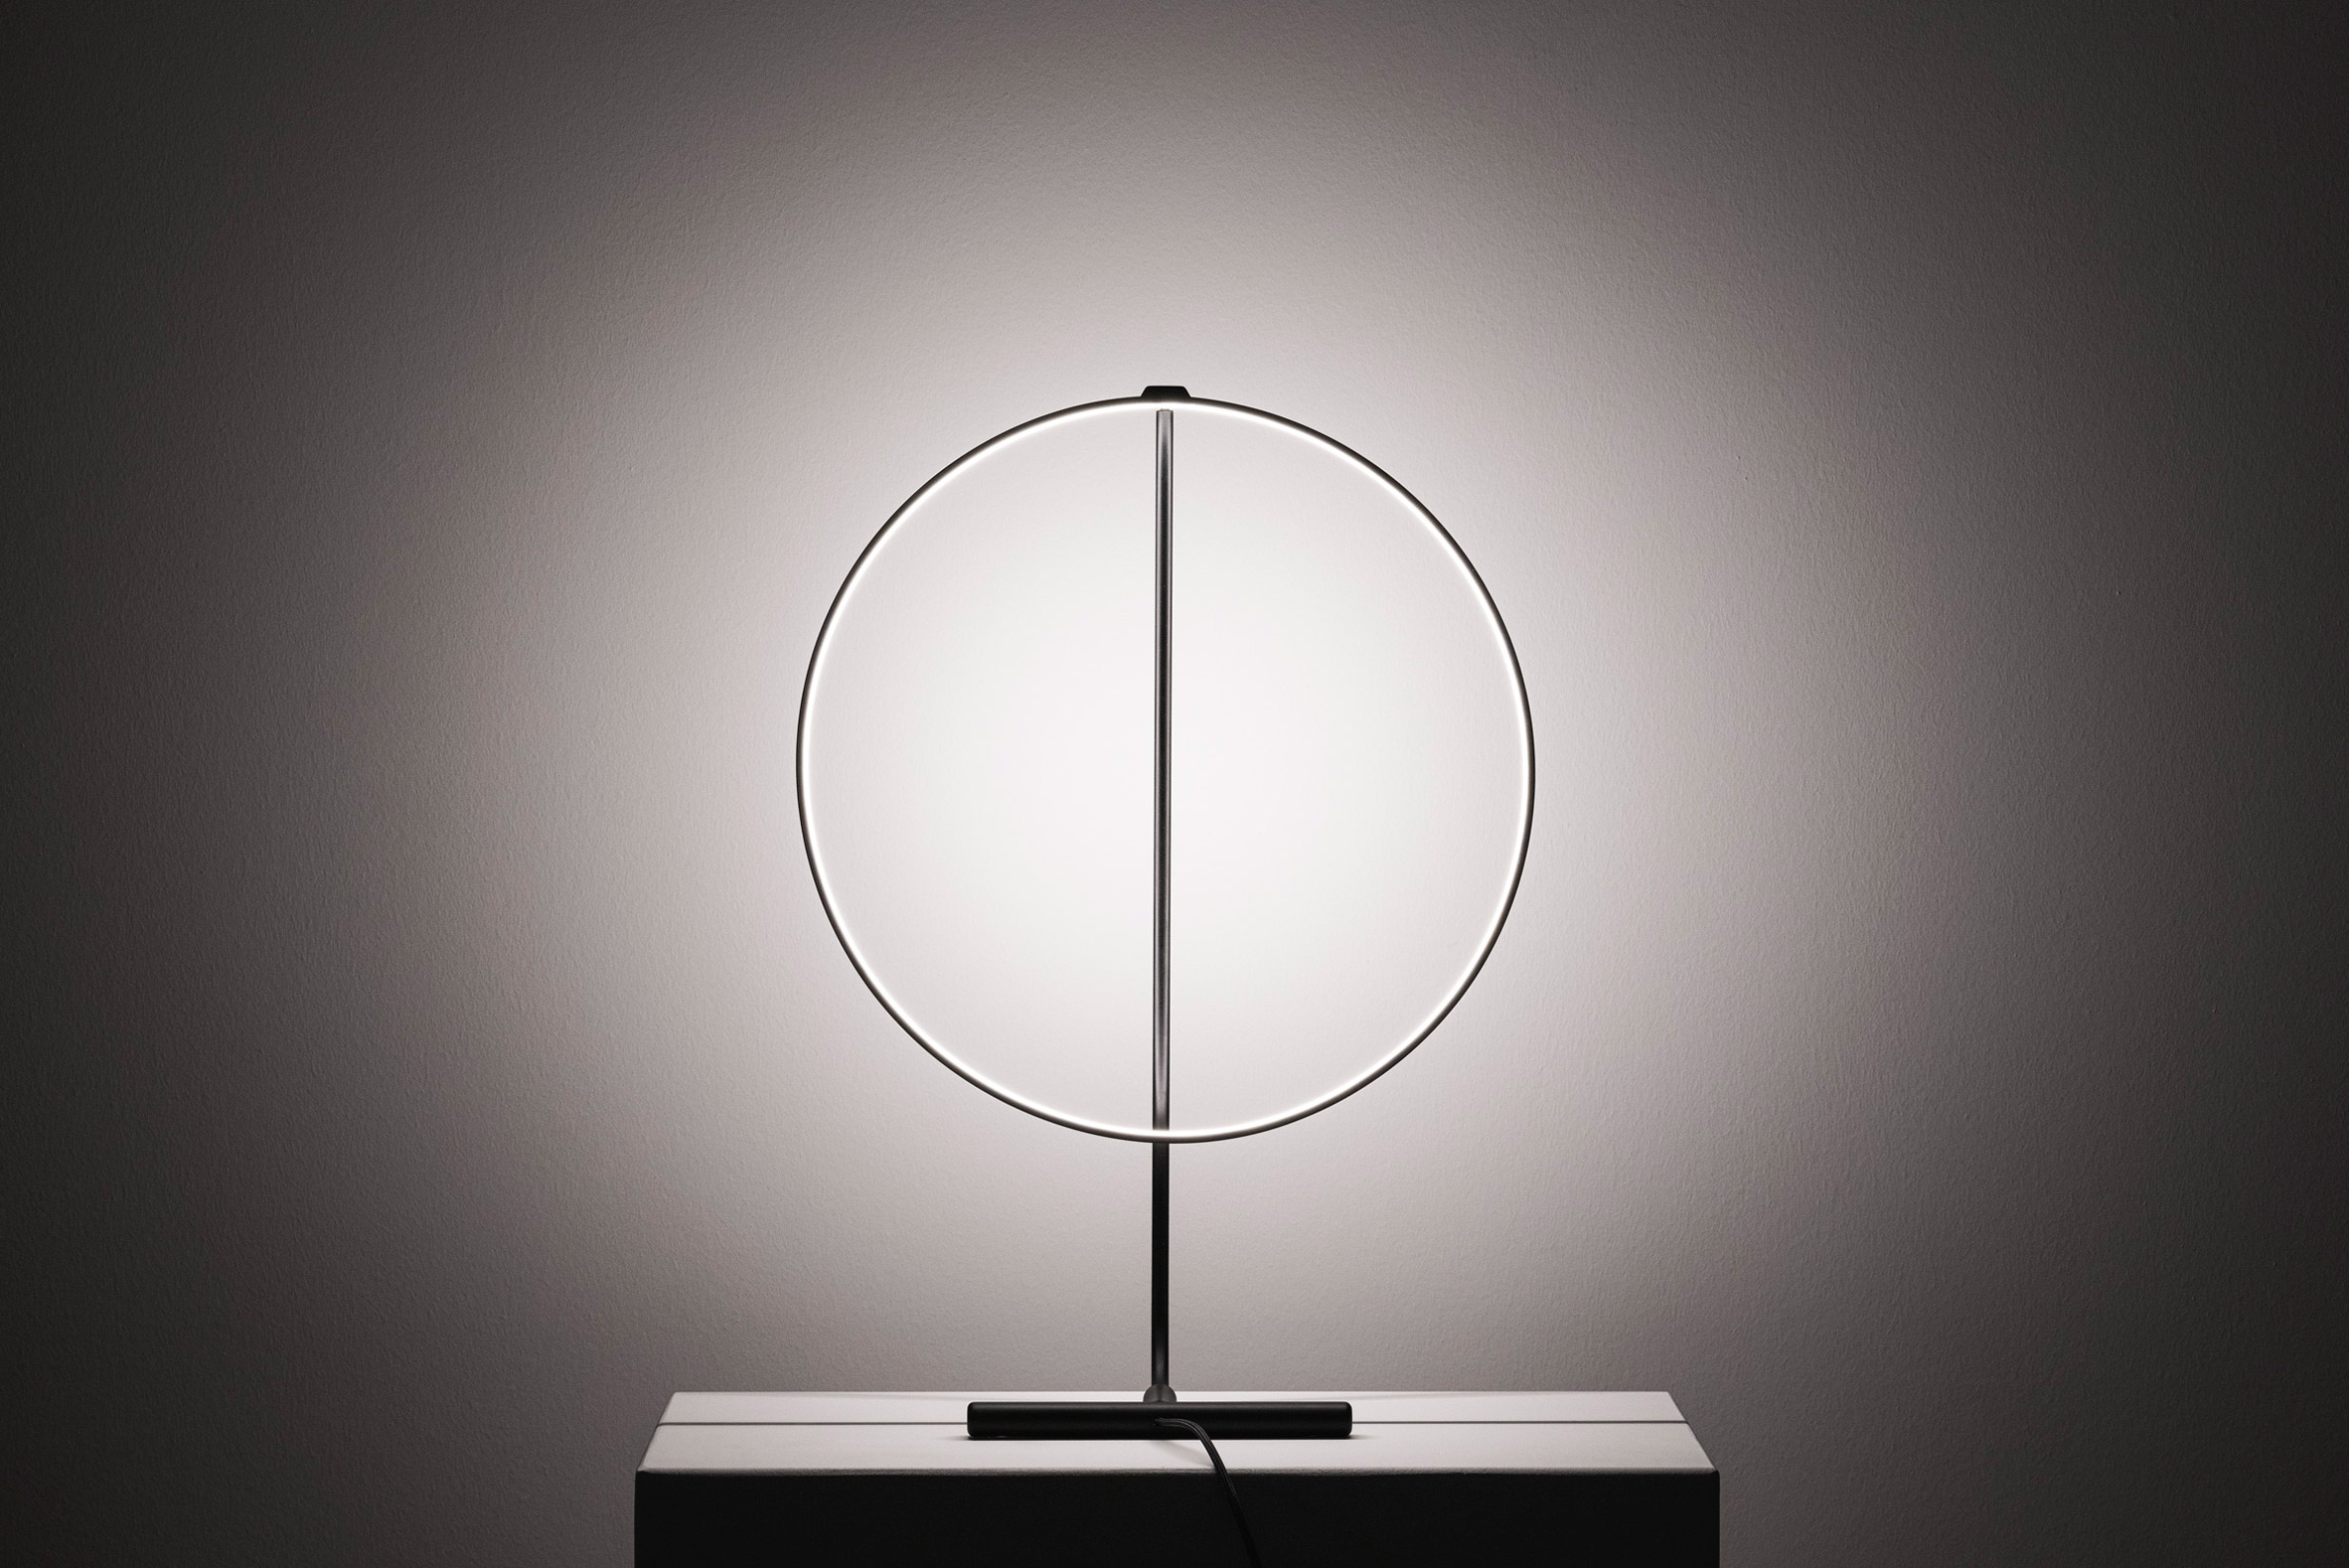 Poise lamp by Robert Dabi can rotate 320 degrees